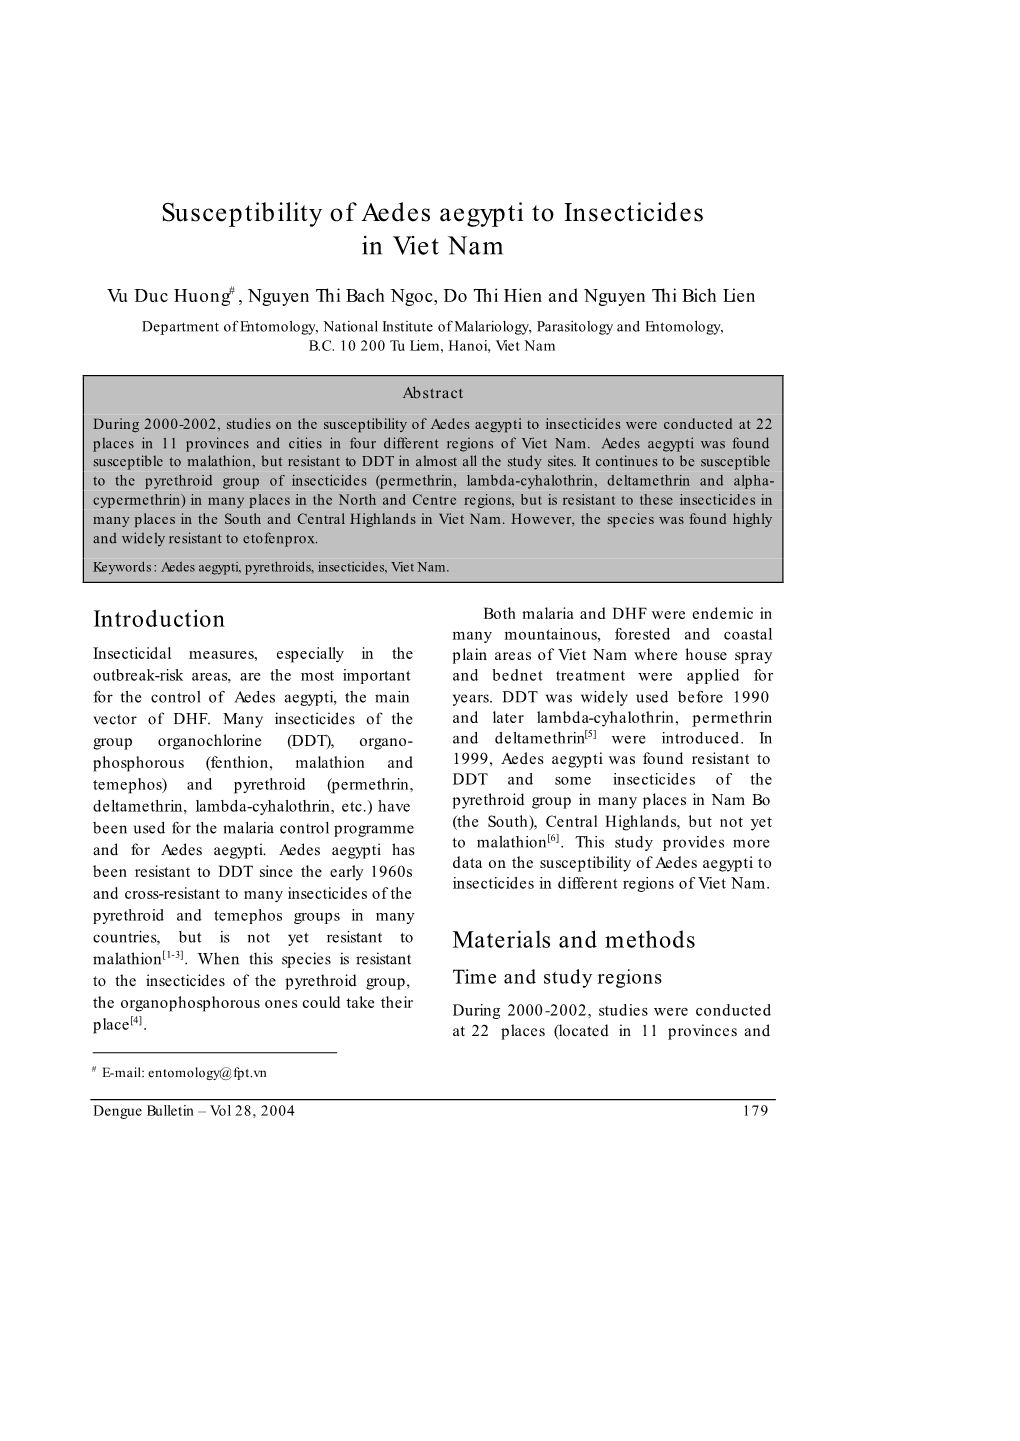 Susceptibility of Aedes Aegypti to Insecticides in Viet Nam: Chapter 22